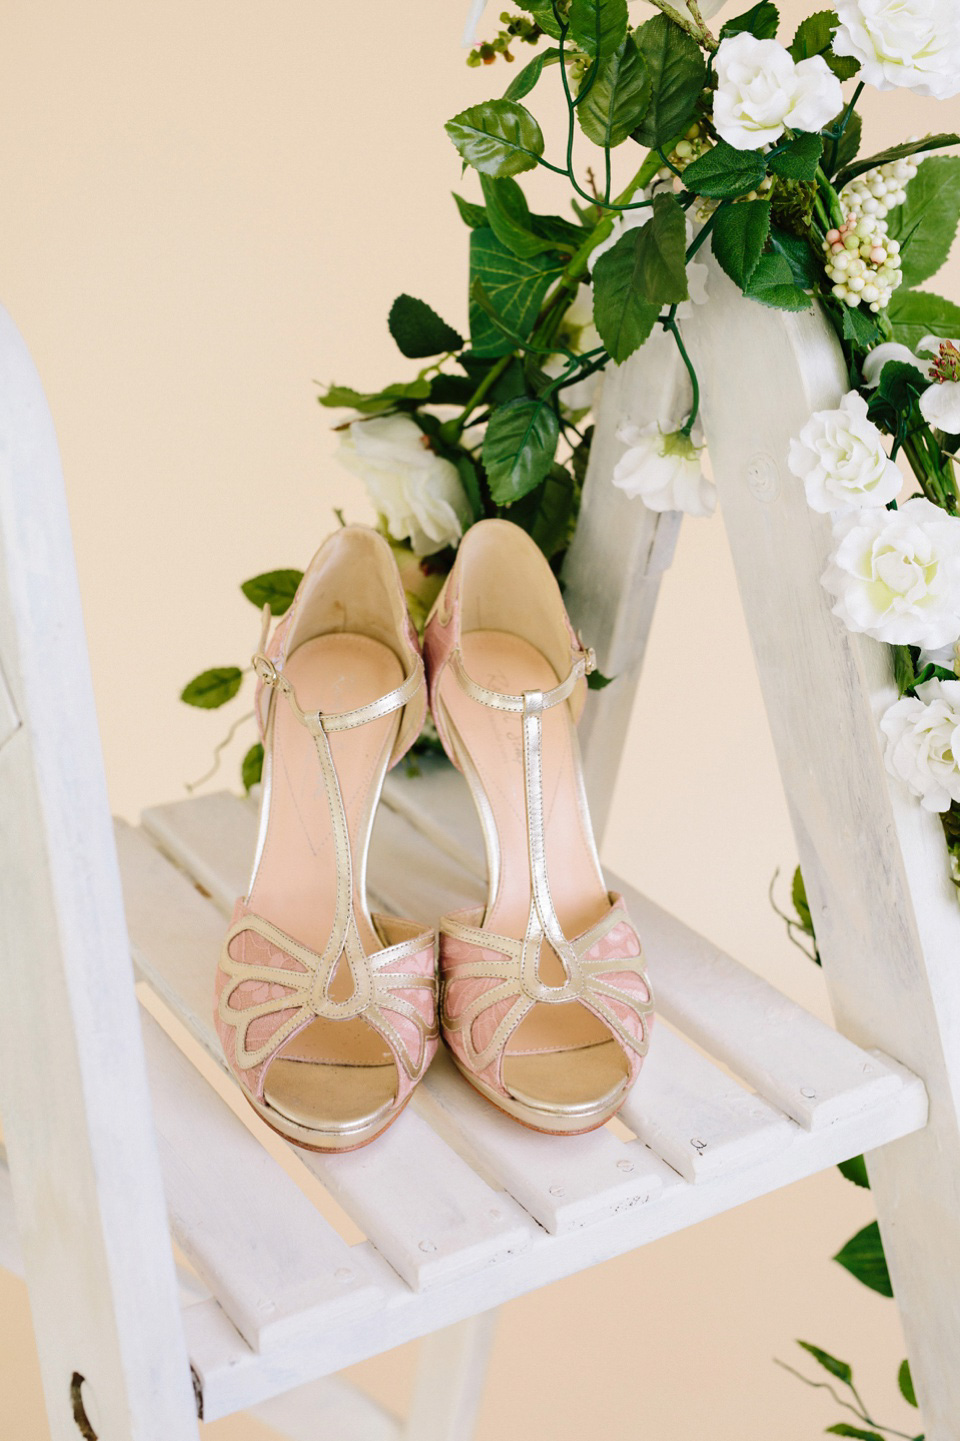 Stylish, comfortable, colourful and elegant wedding shoes by Rachel Simpson